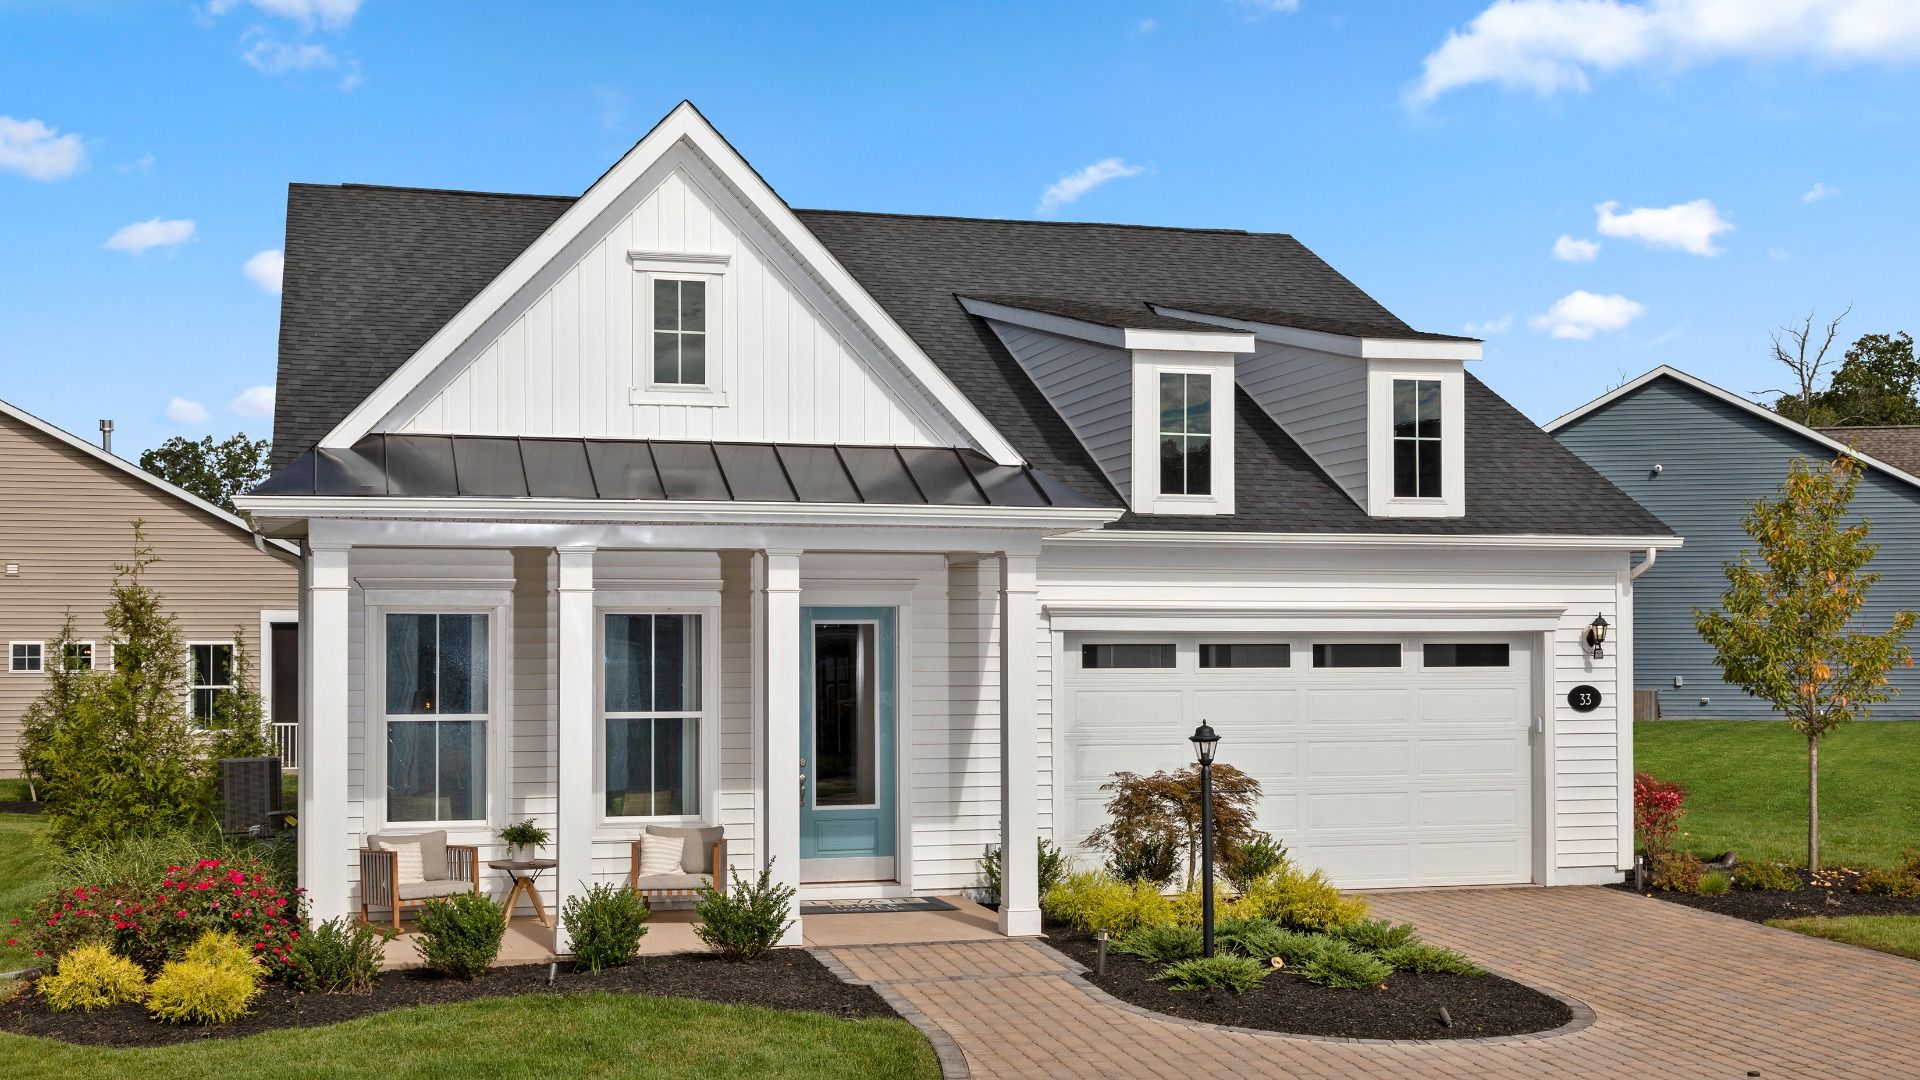 Single Family Home:Exterior View of the Curator Home Design Available at Parkside in Upper Marlboro